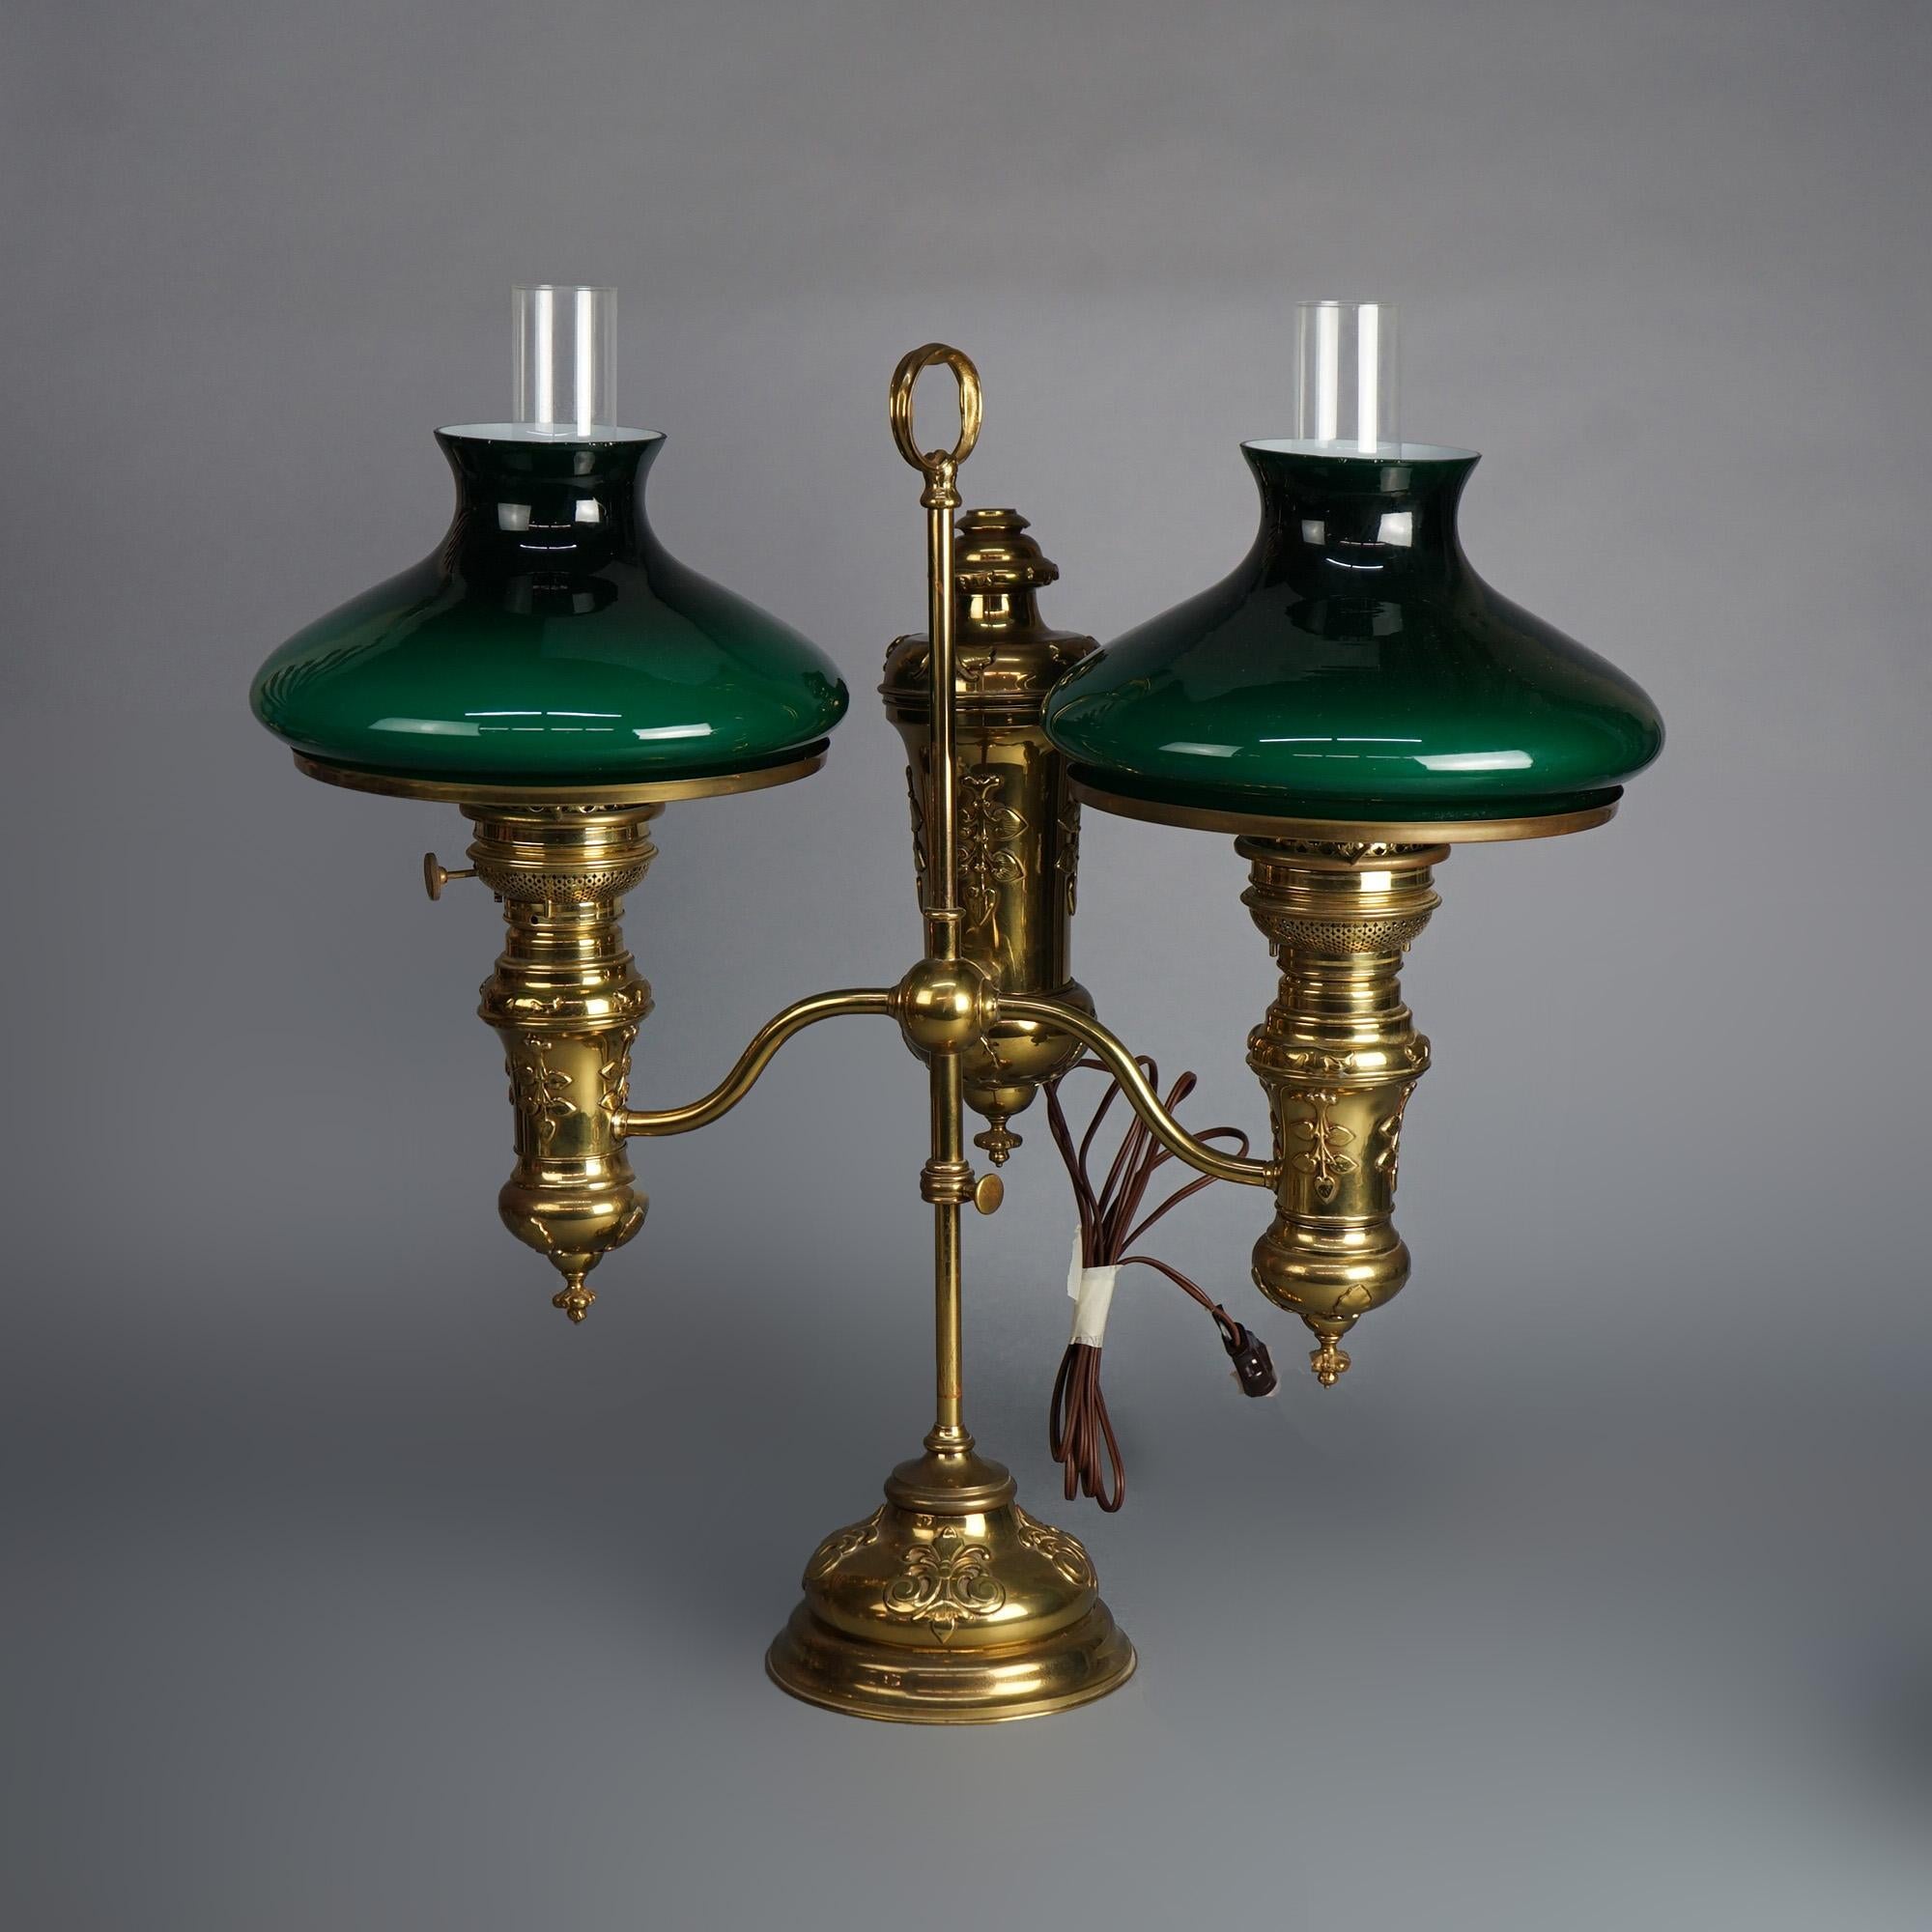 Antique Bradley & Hubbard Brass with Encased Deep Green Glass Double Student Lamp with Embossed Foliate Elements, Electrified, c1890

Measures - 26.5